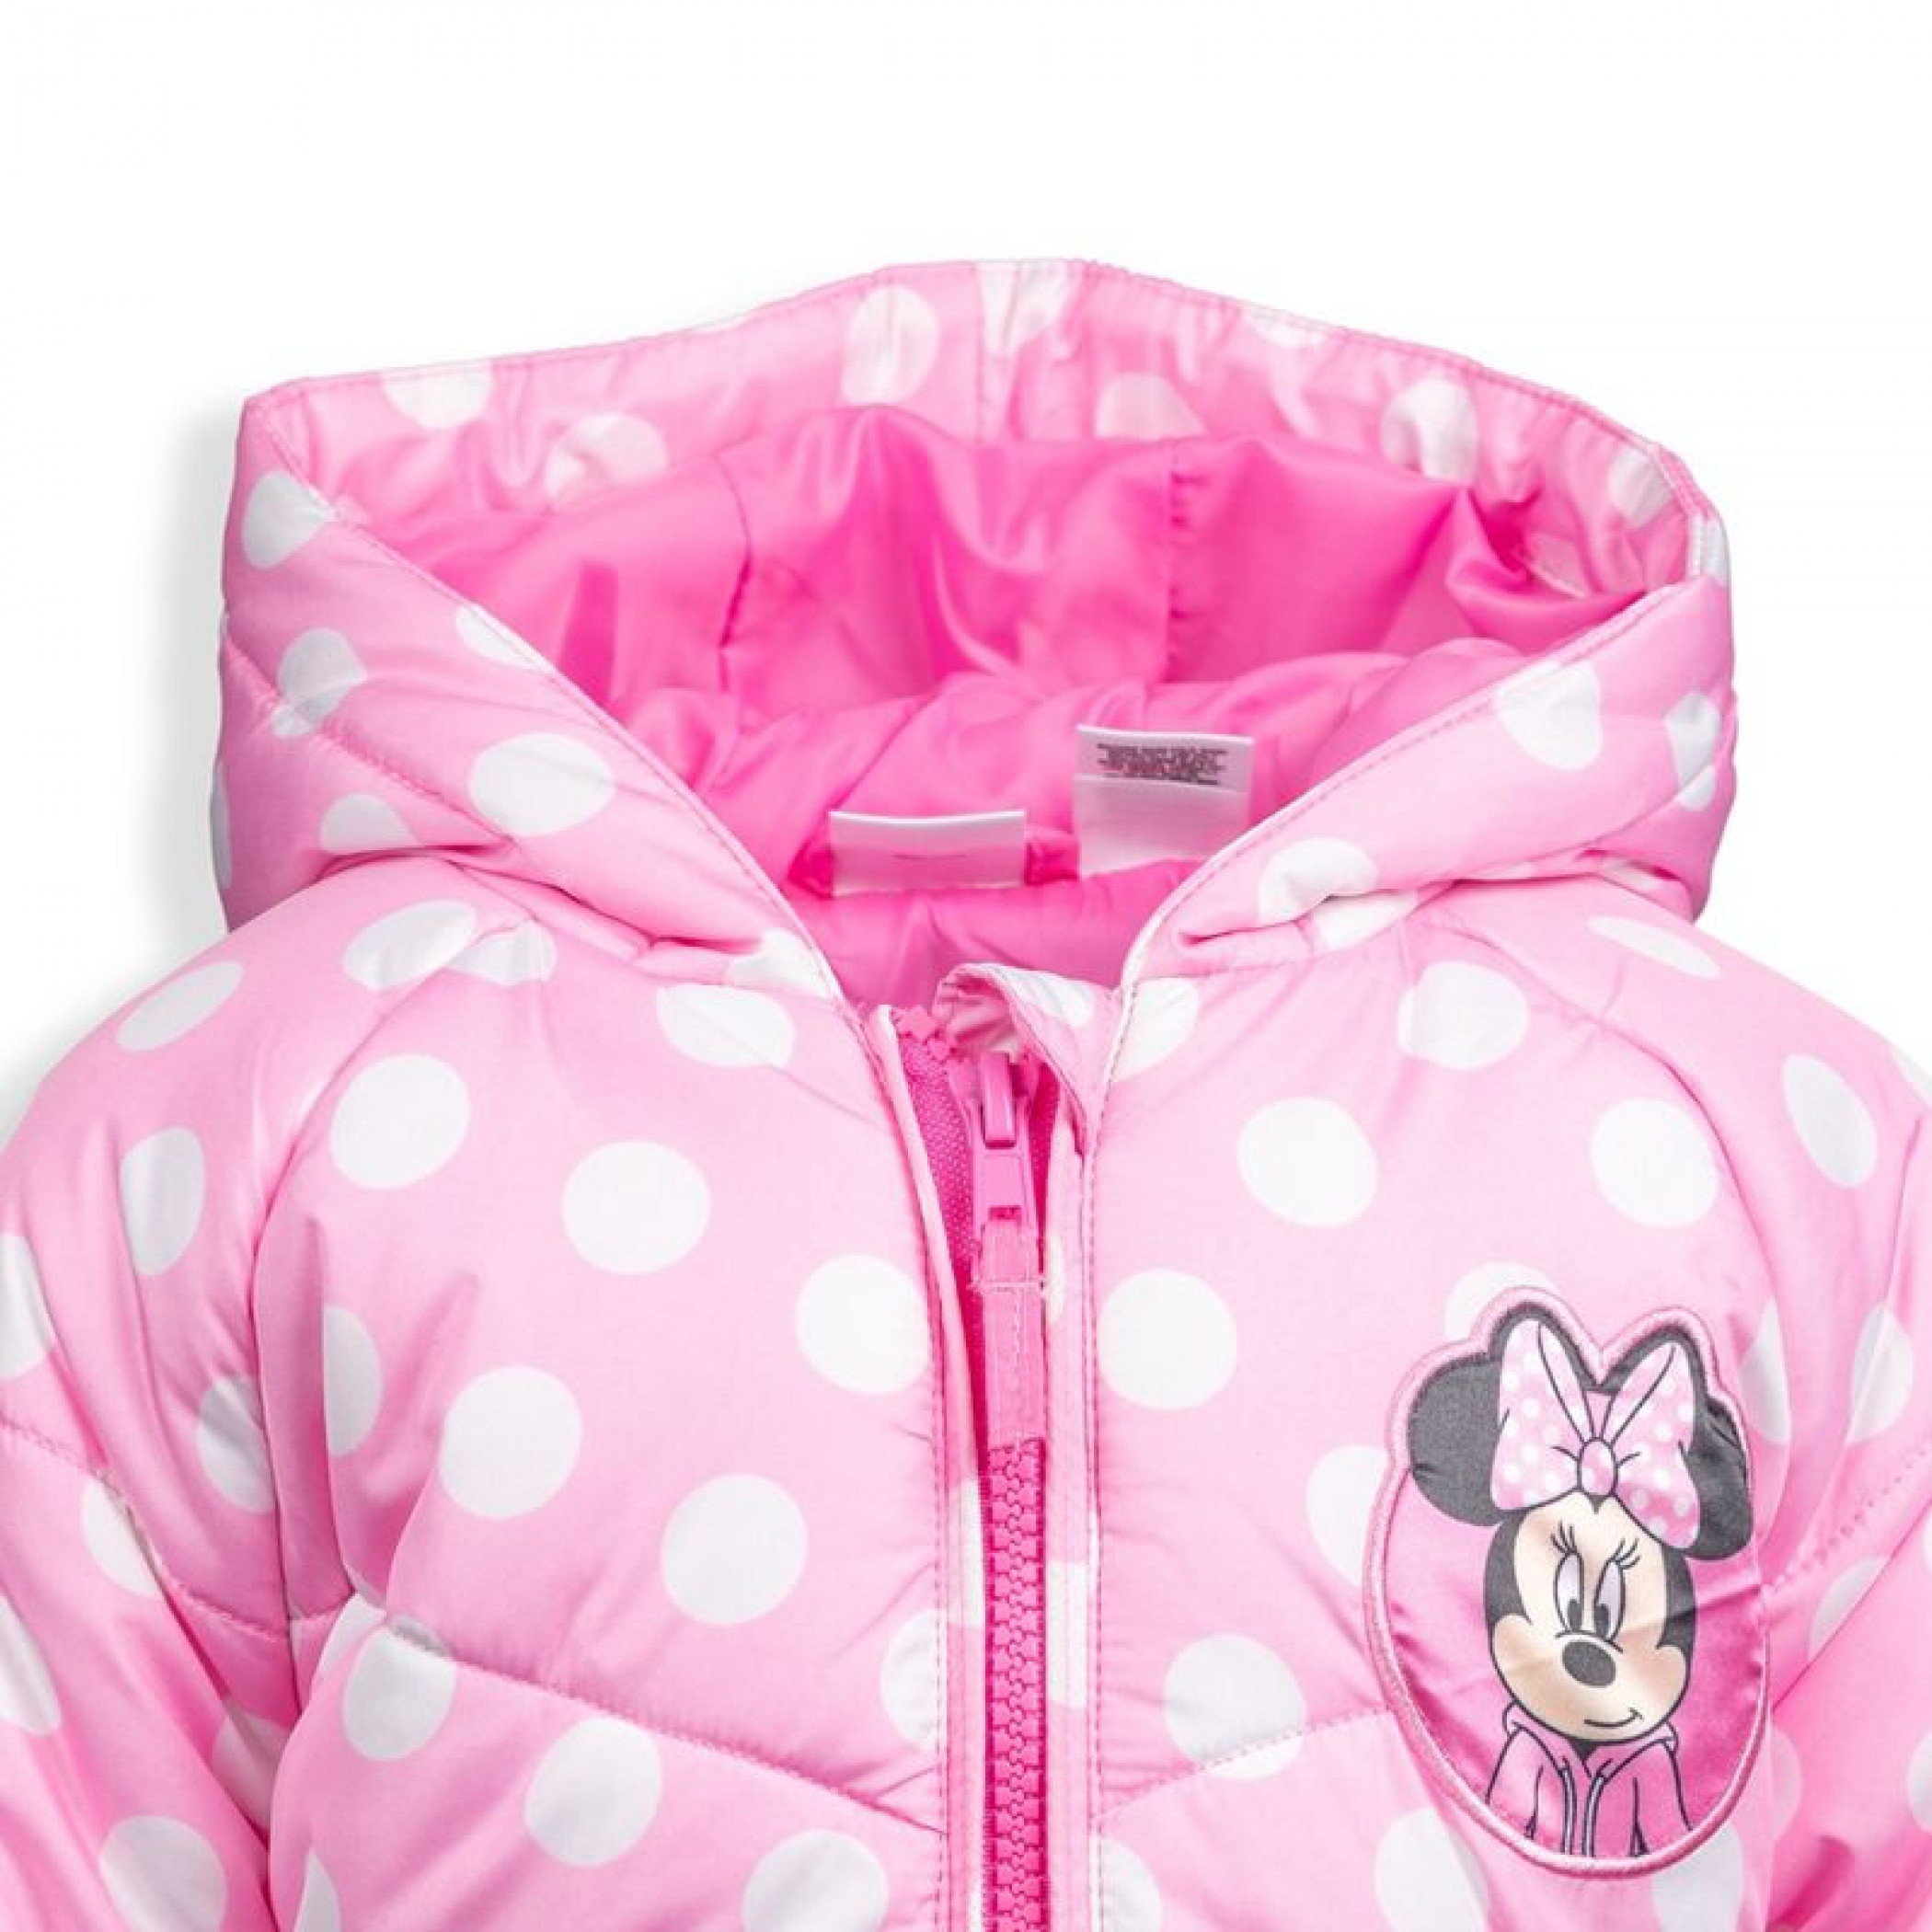 Minnie Mouse Polka Dots Toddler Girl's Jacket Coat with Ears and Bow